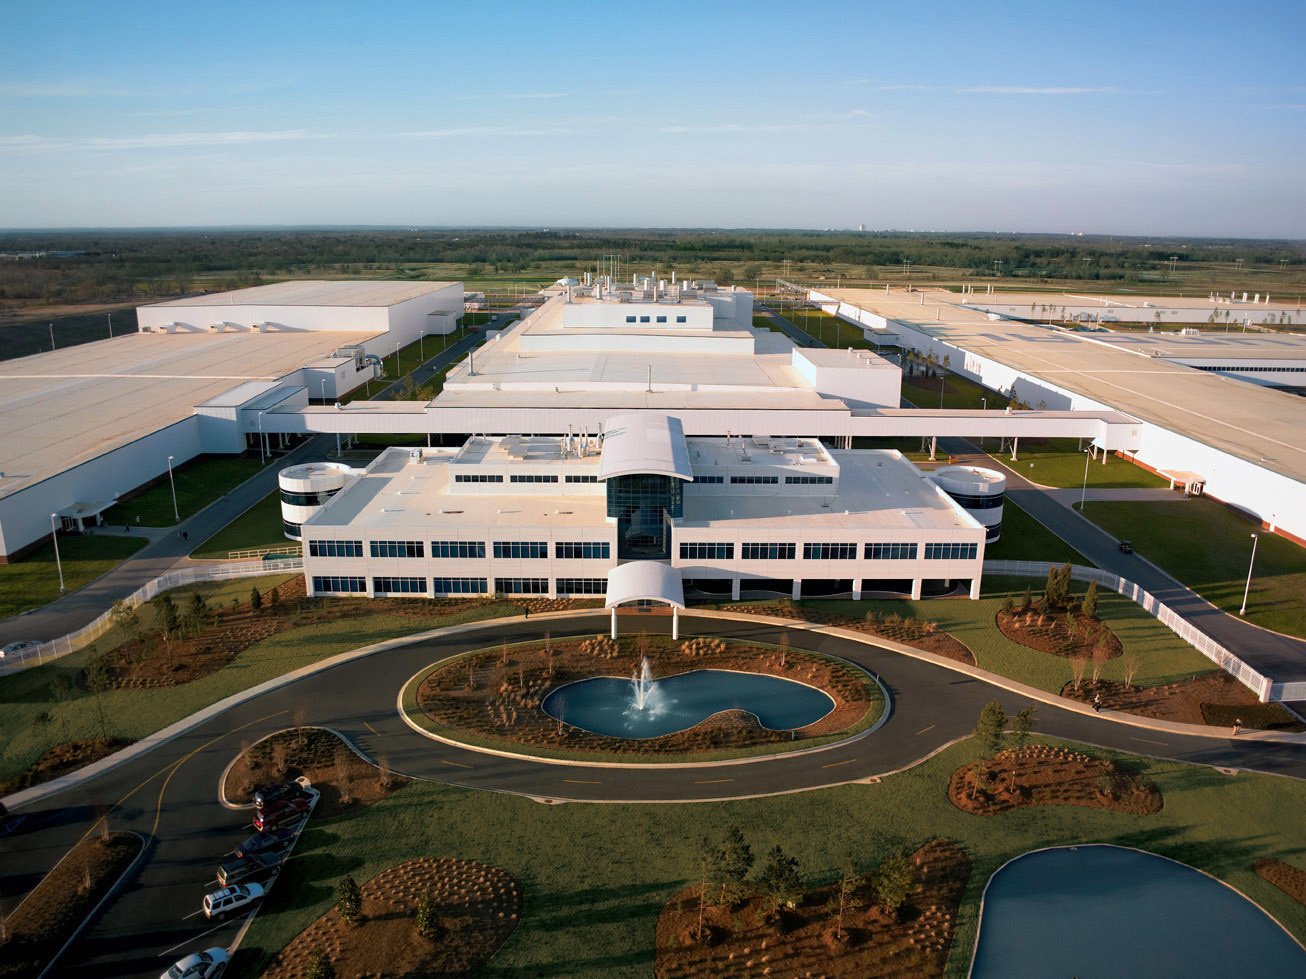 Hyundai Motor Manufacturing in Alabama produces many of the vehicles Hyundai sells in the U.S.